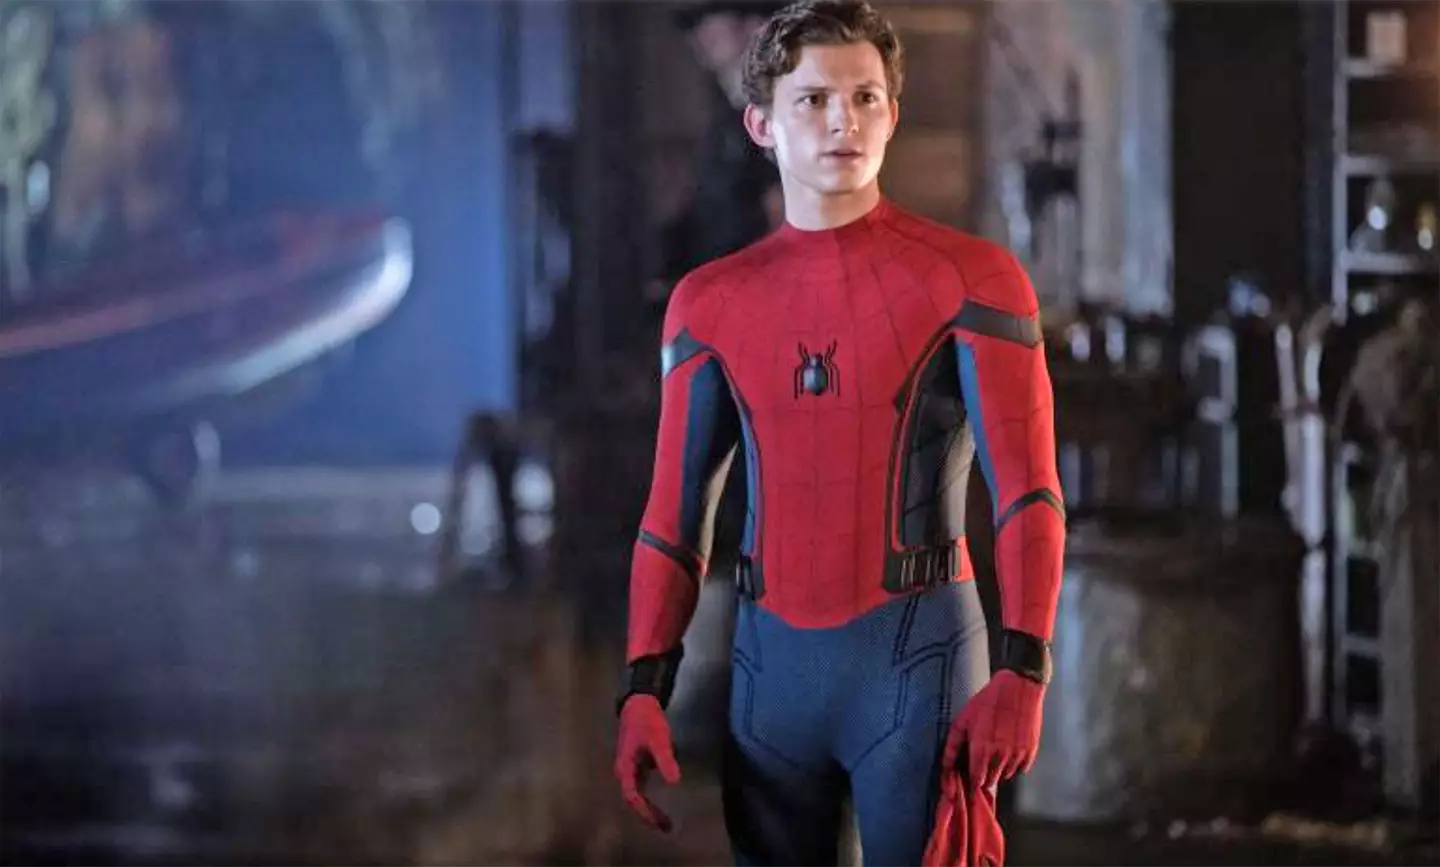 Spider-Man: No Way Home grossed over $1 billion at the global box office.